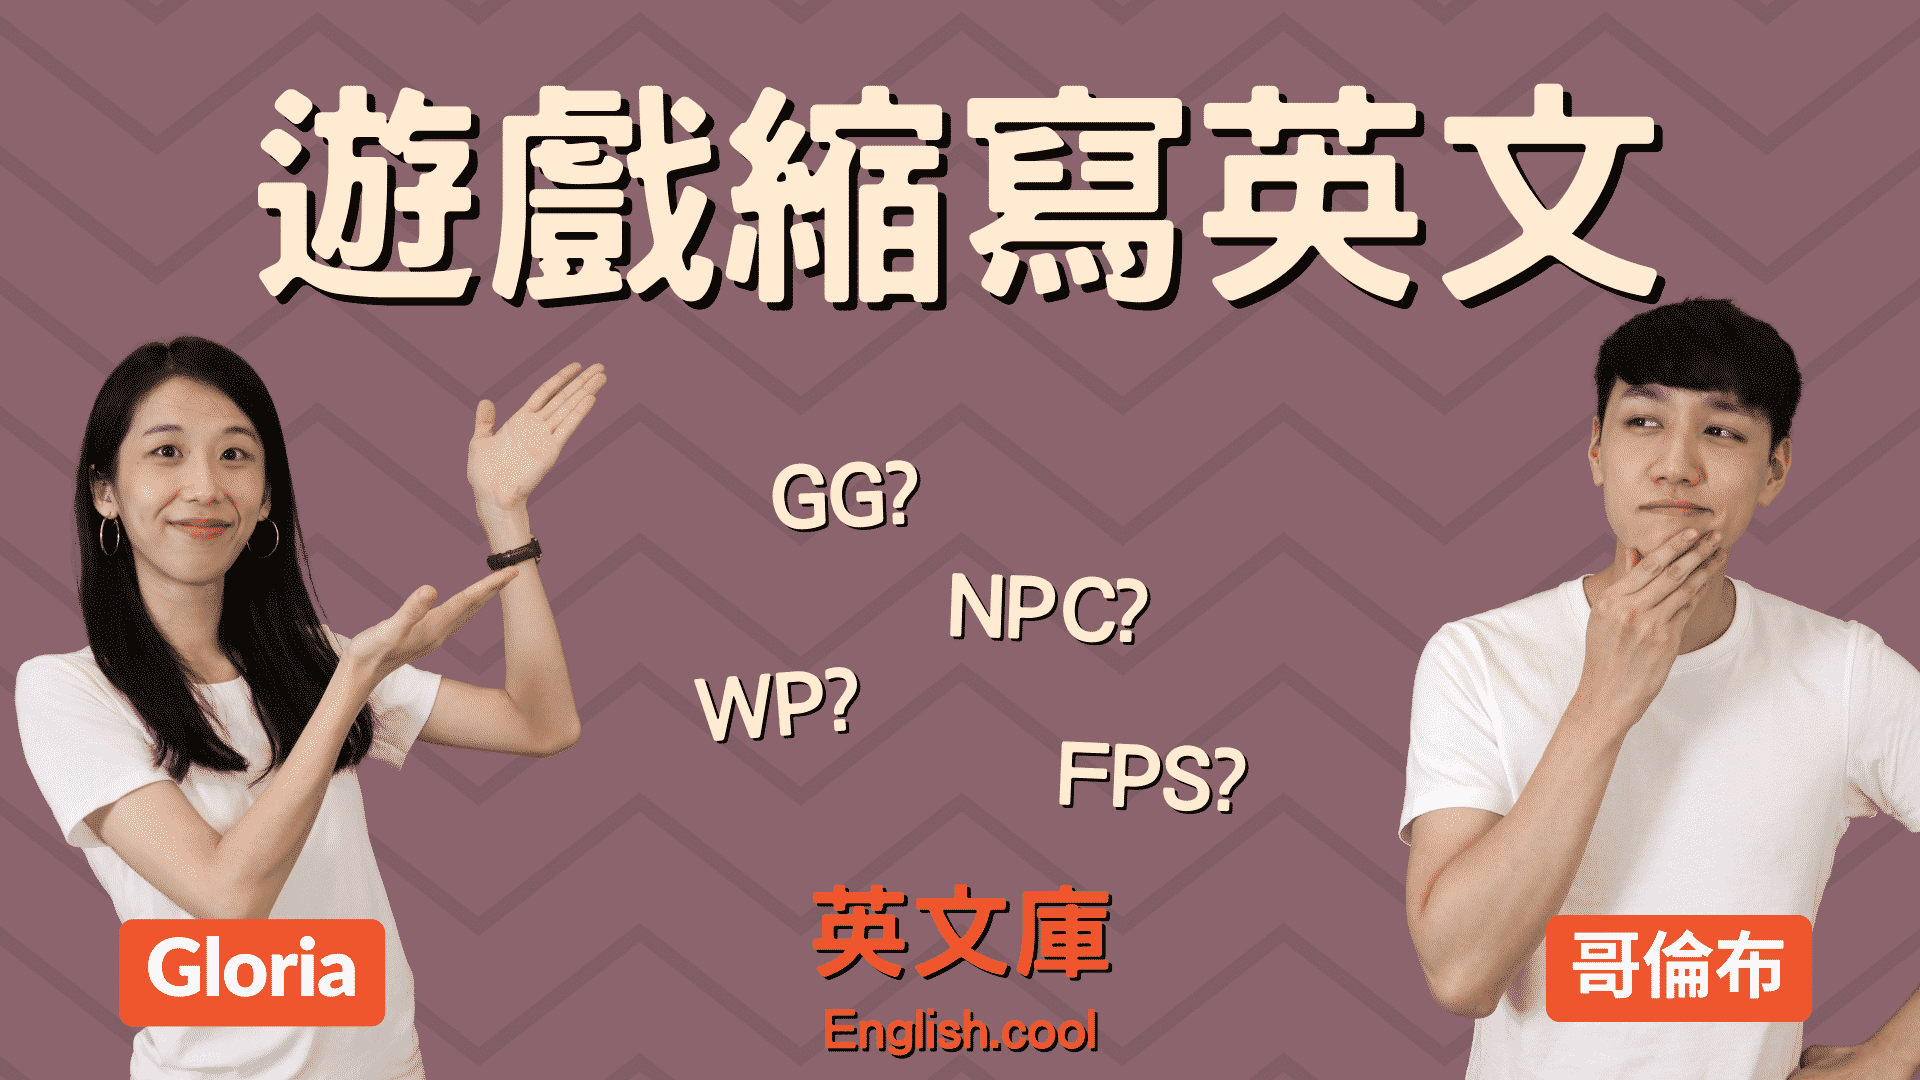 You are currently viewing 【遊戲縮寫】NPC、WP、FPS、GG 是什麼意思？